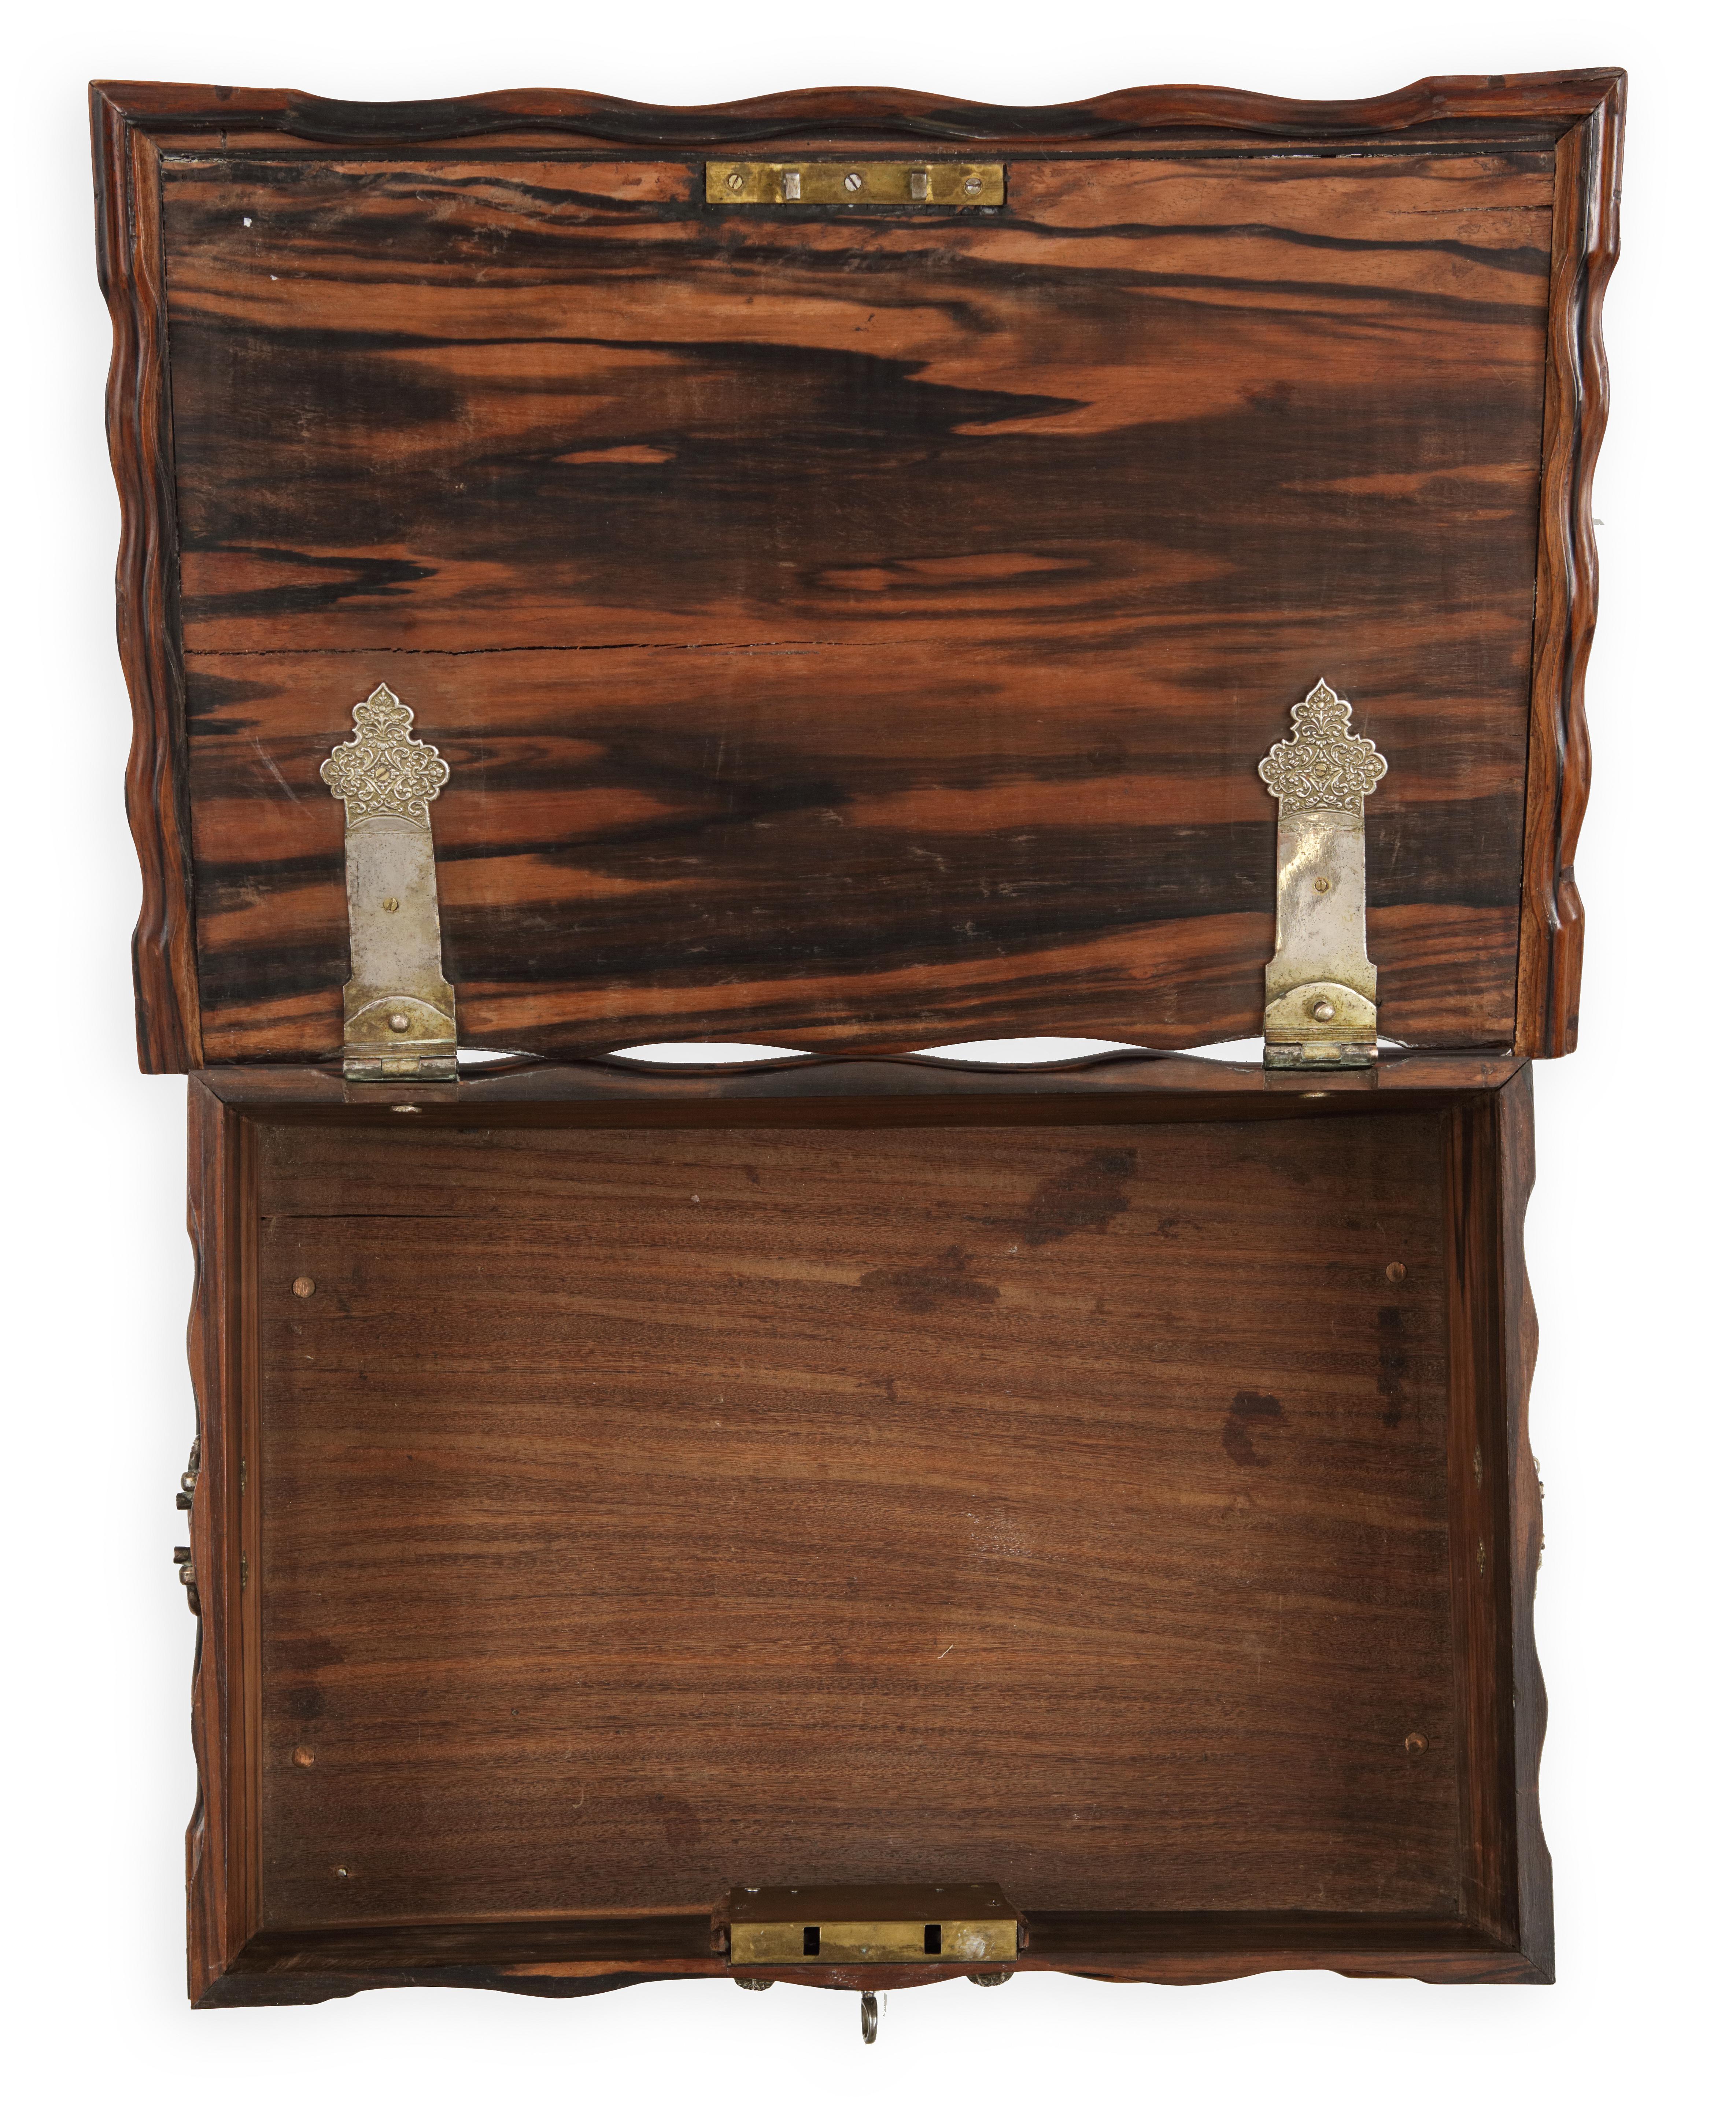 A Dutch-colonial Sri Lankan coromandel wood document box with silver mounts
Probably Galle, 18th century

H. 19 x W. 49 x D. 33 cm


The chest with waving sides and front has applied silver escutcheons and loop handles on the sides, with two